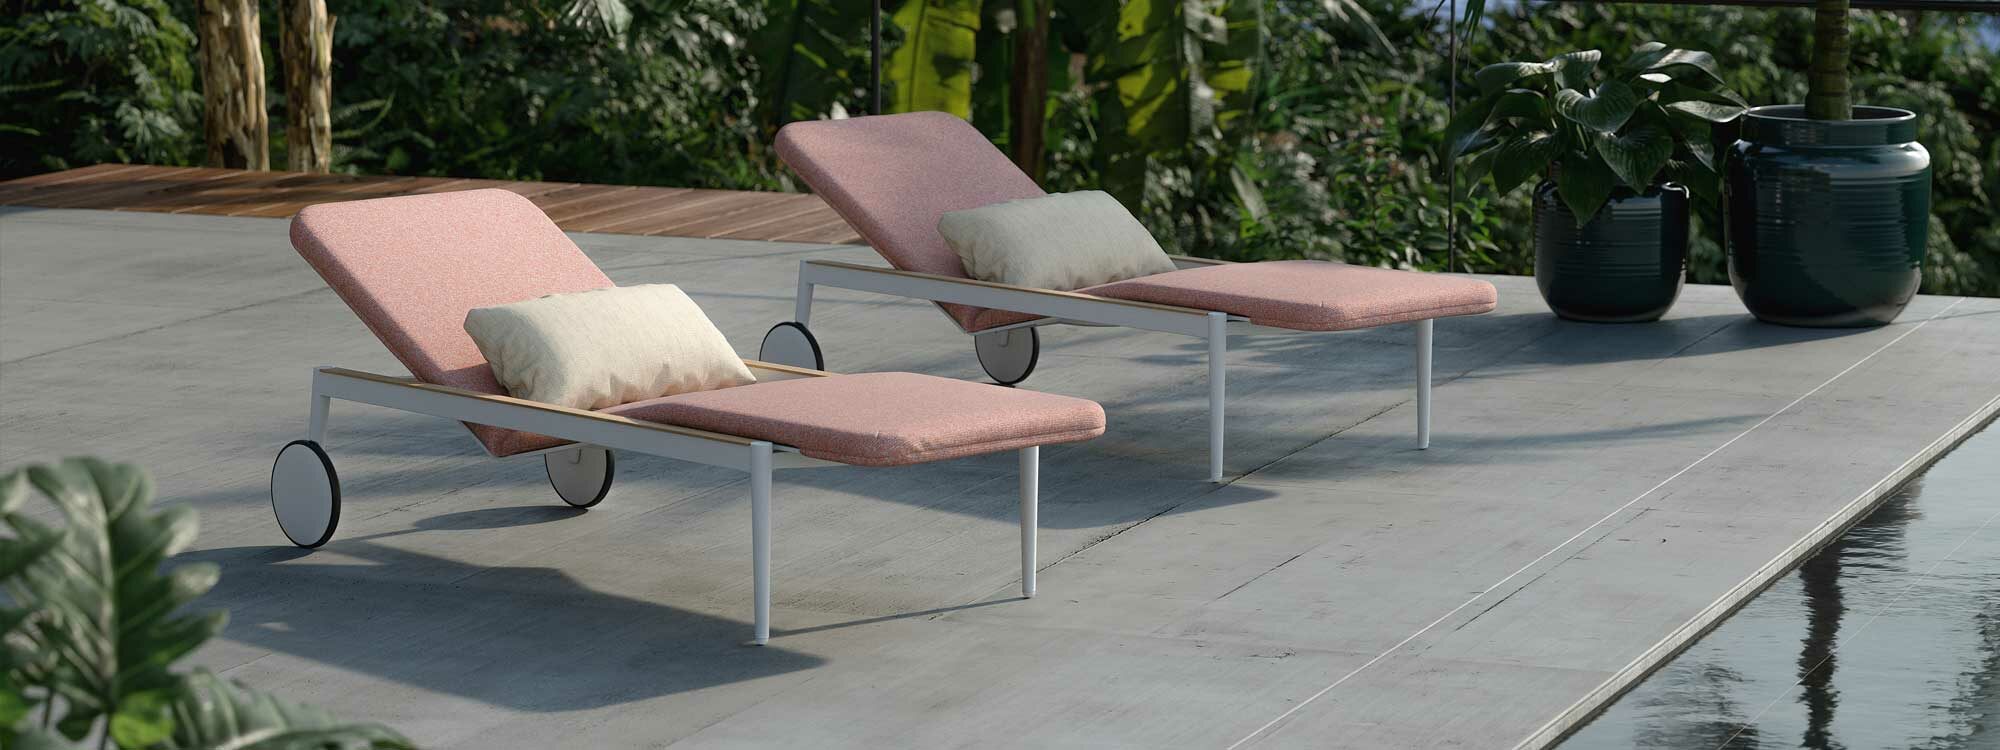 Image of pair of Styletto contemporary sun loungers with rose cushions by Royal Botania